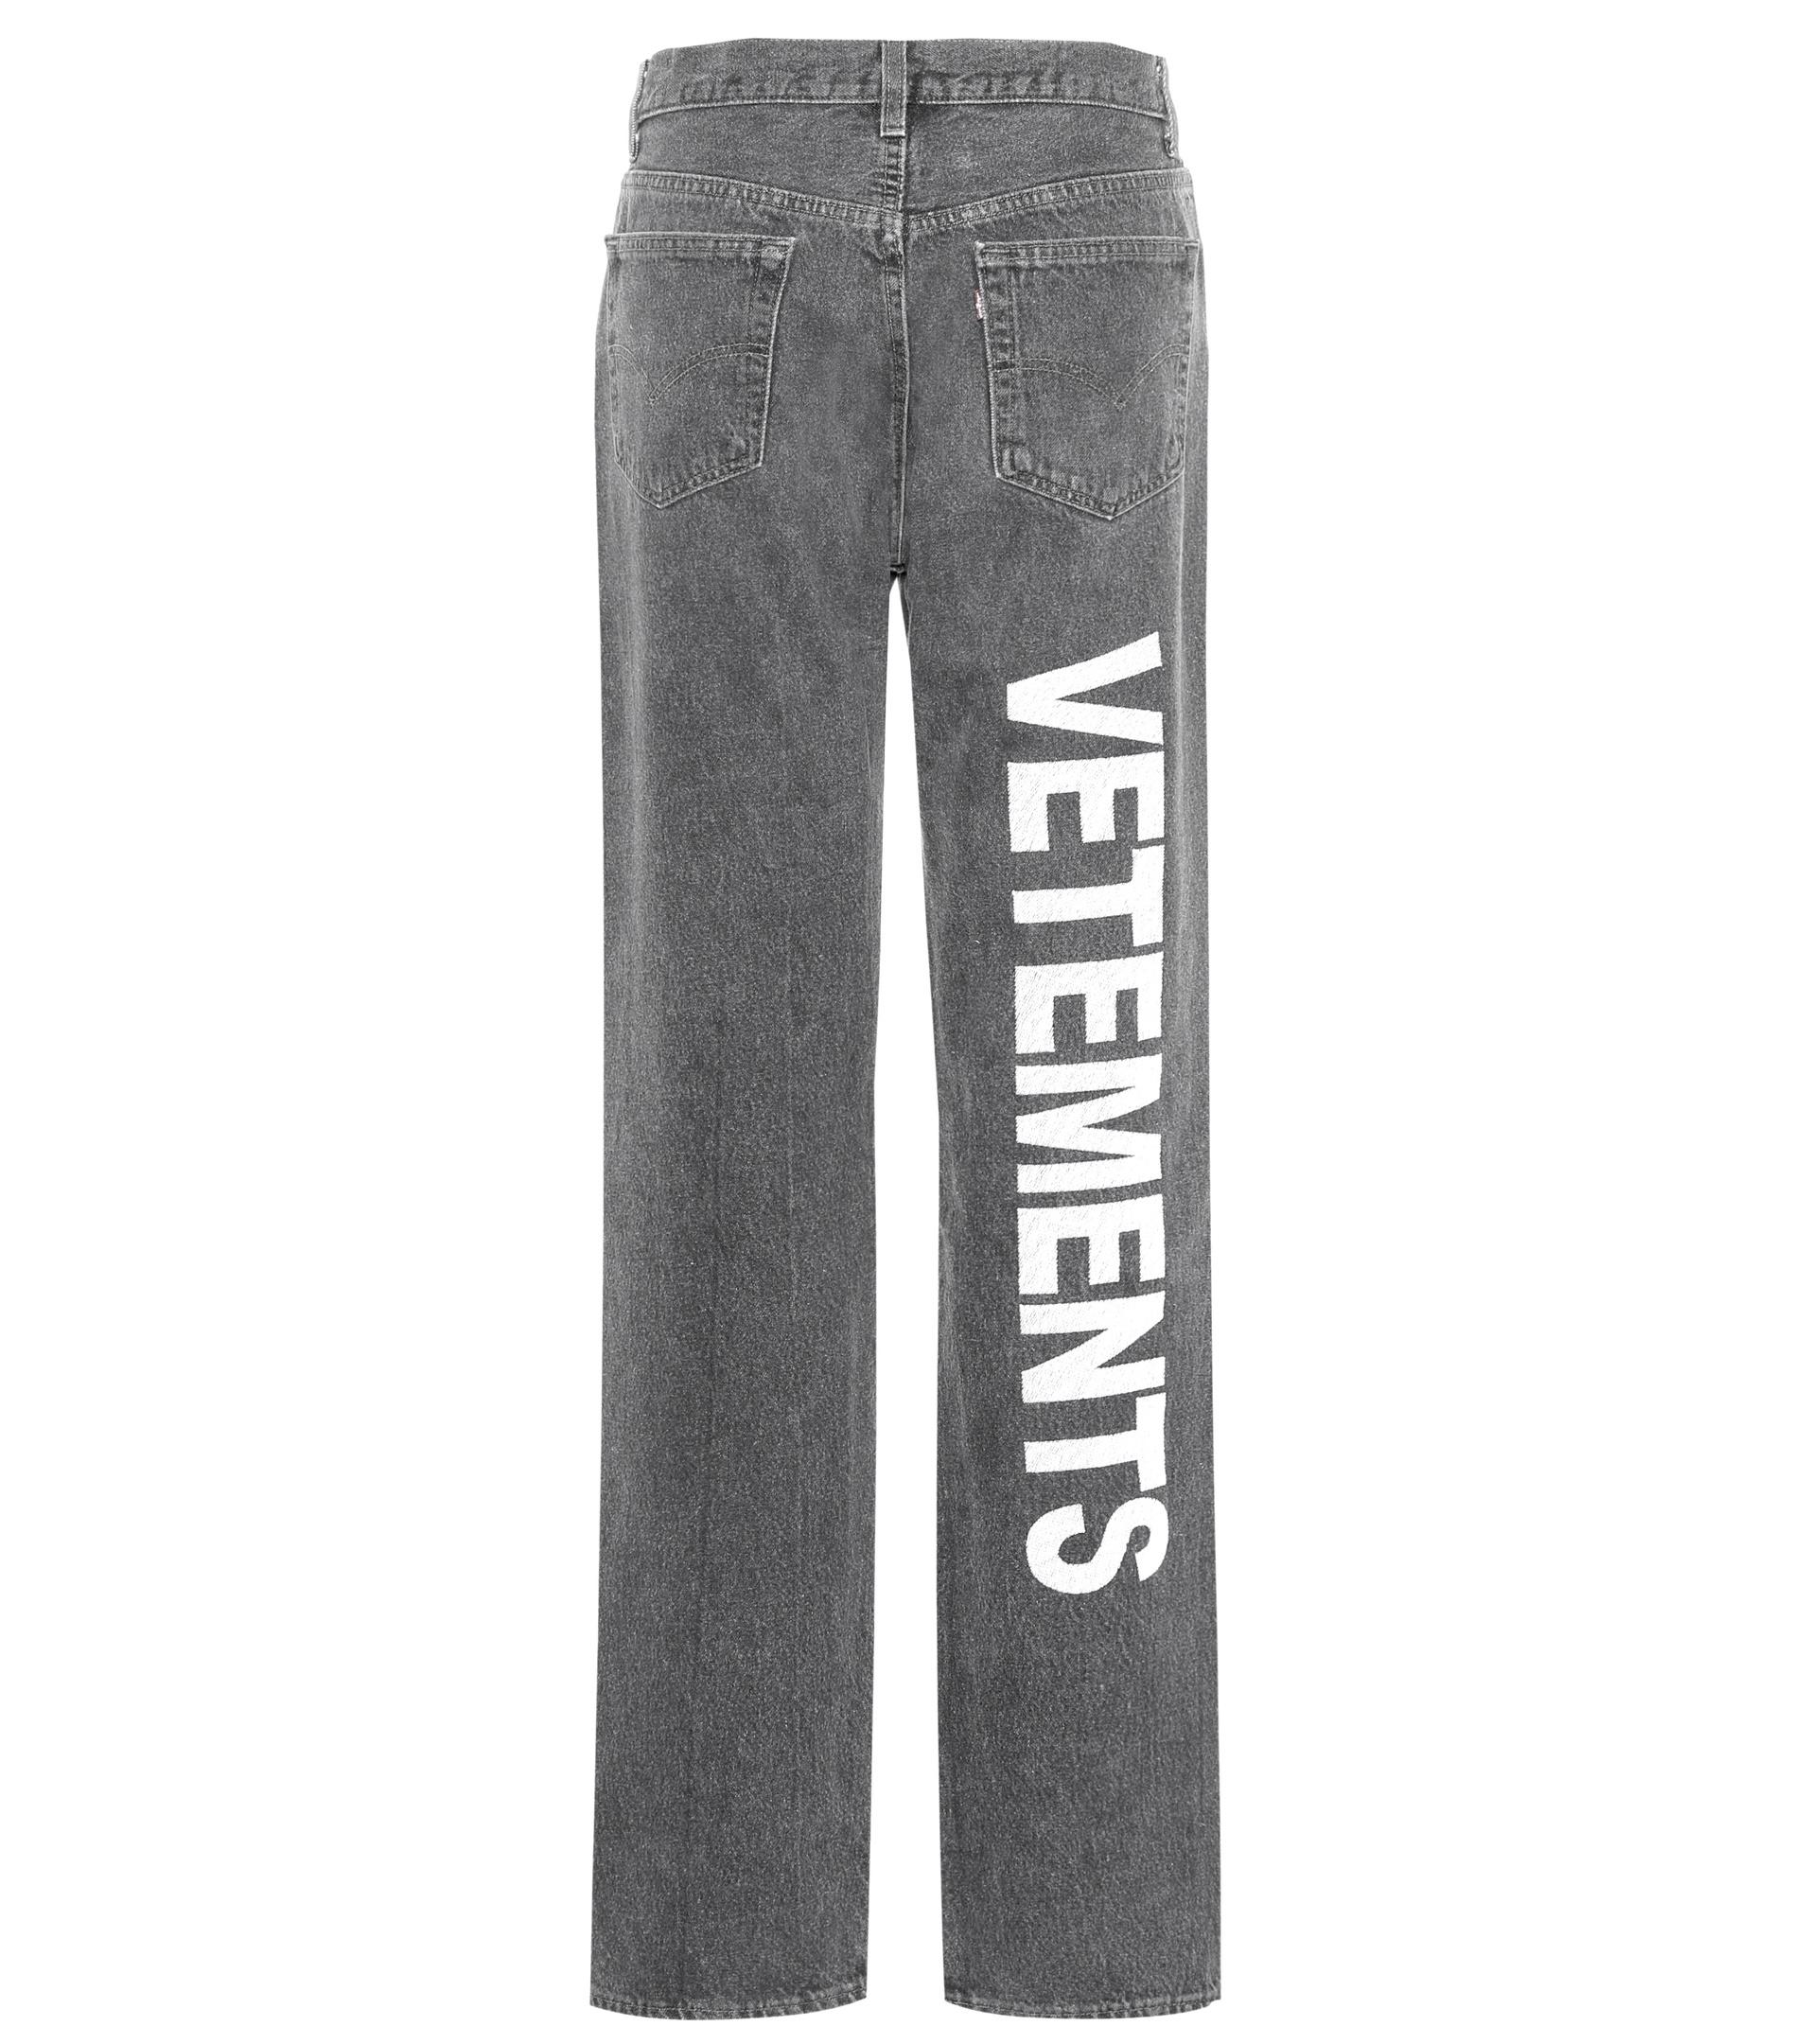 vetements embroidered jeans